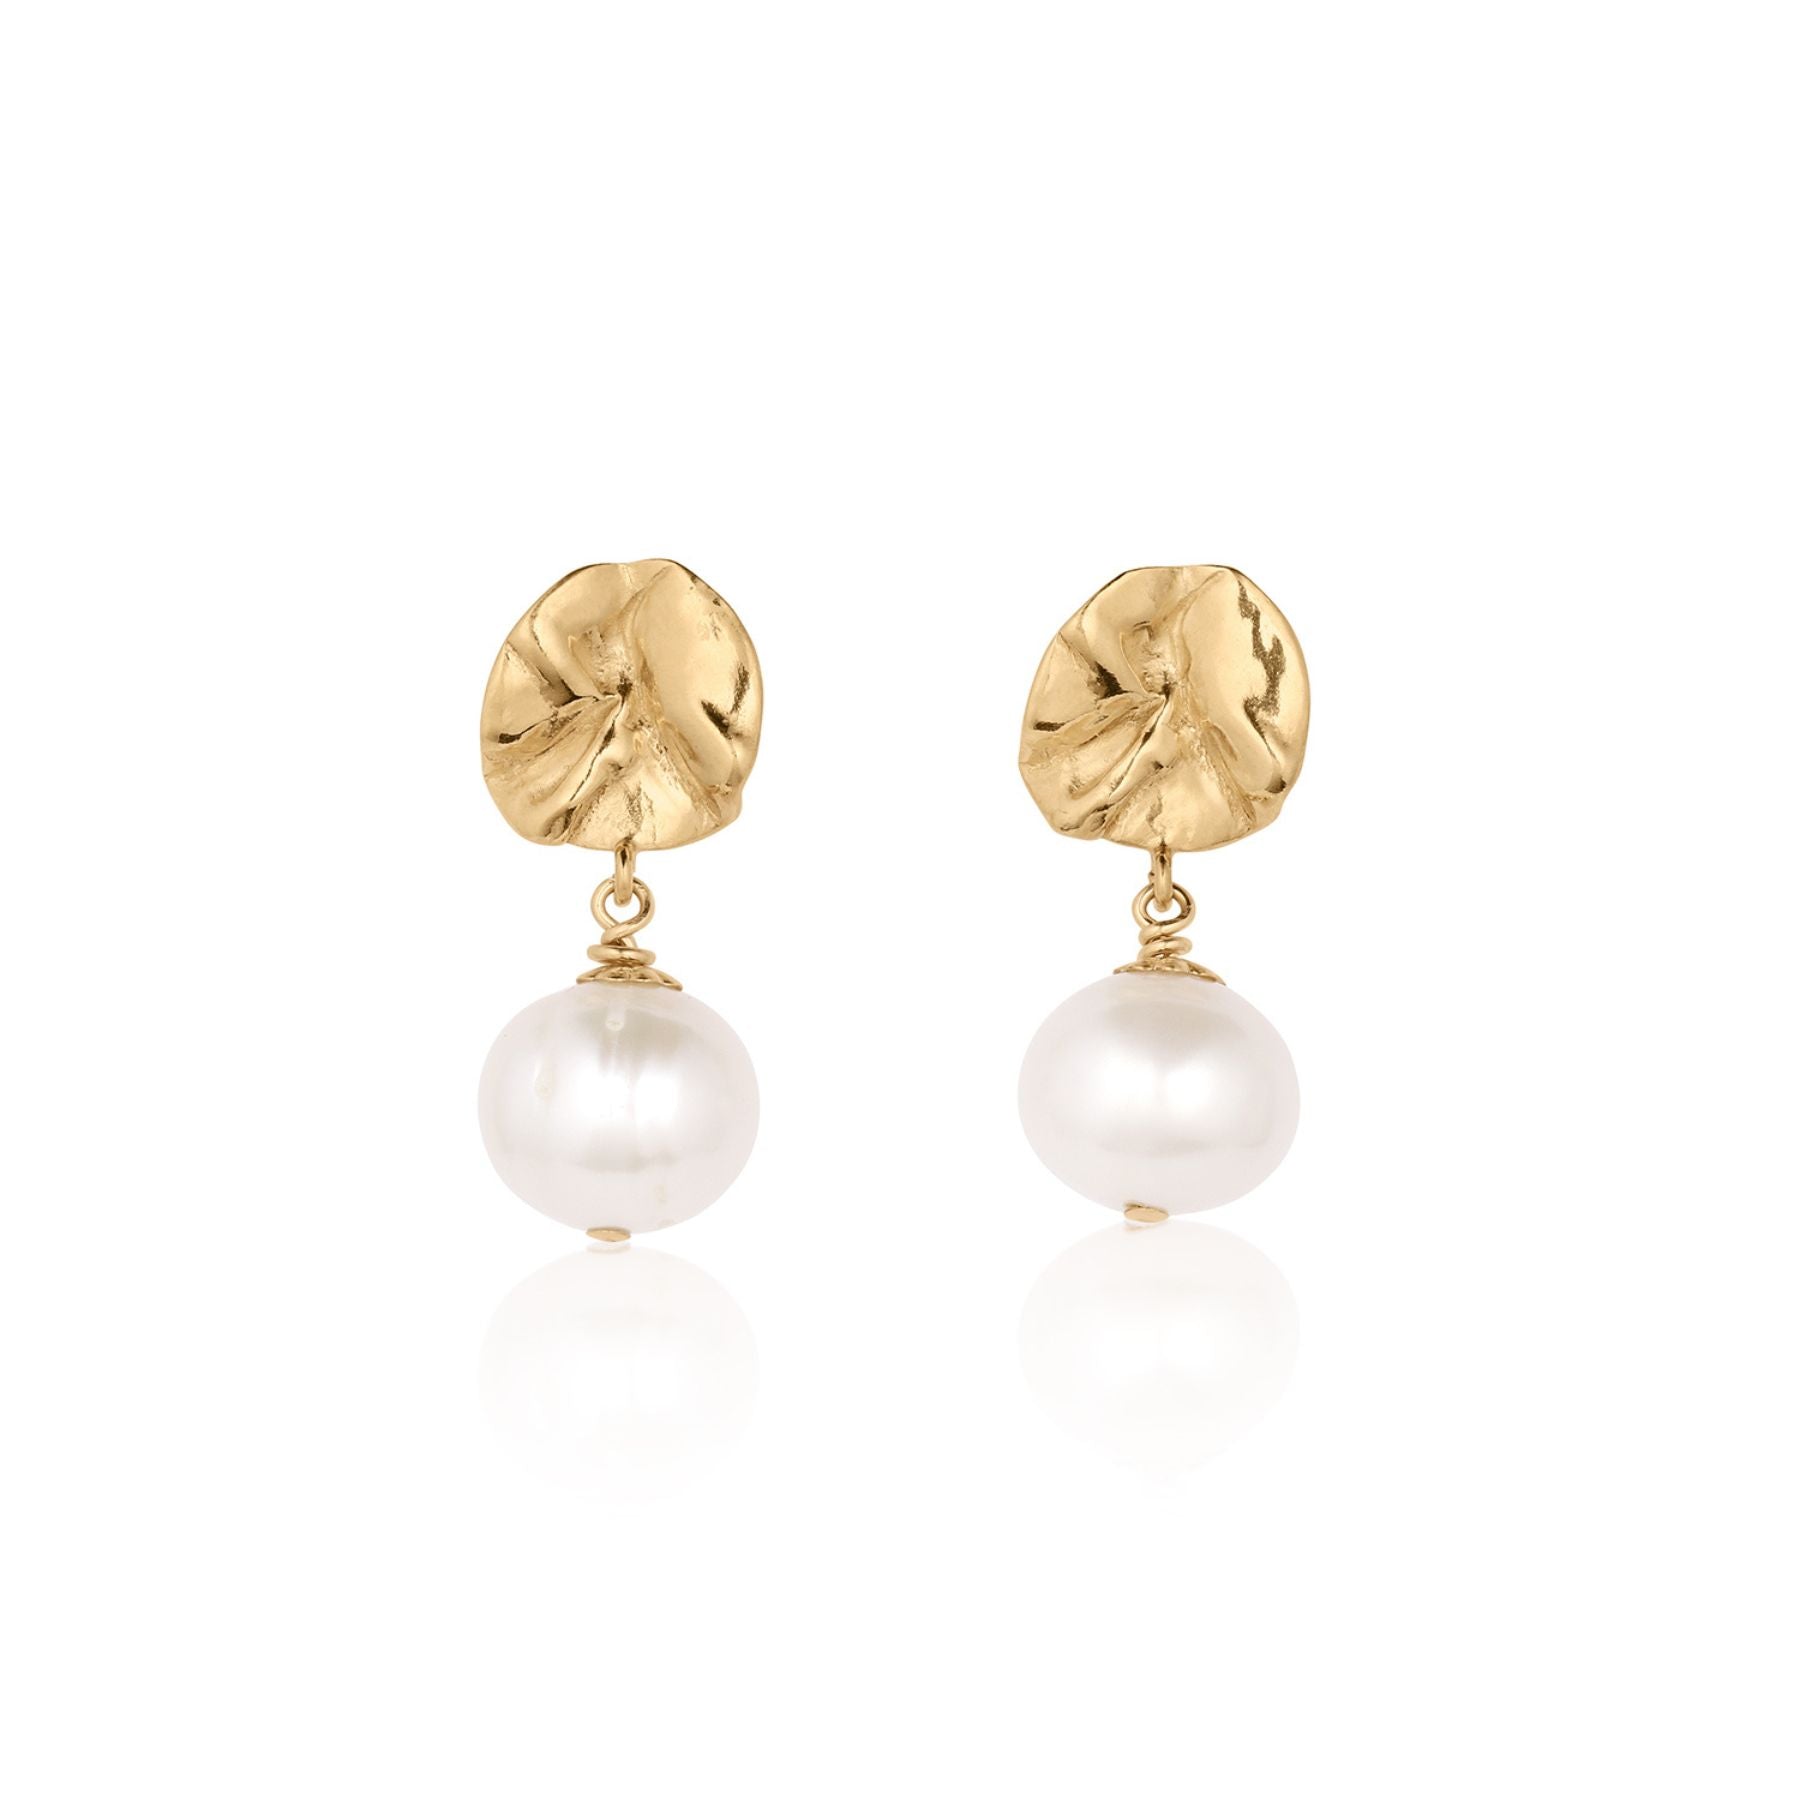 Sculptural lily pad-like studs in 18k gold vermeil with a pearl drop.